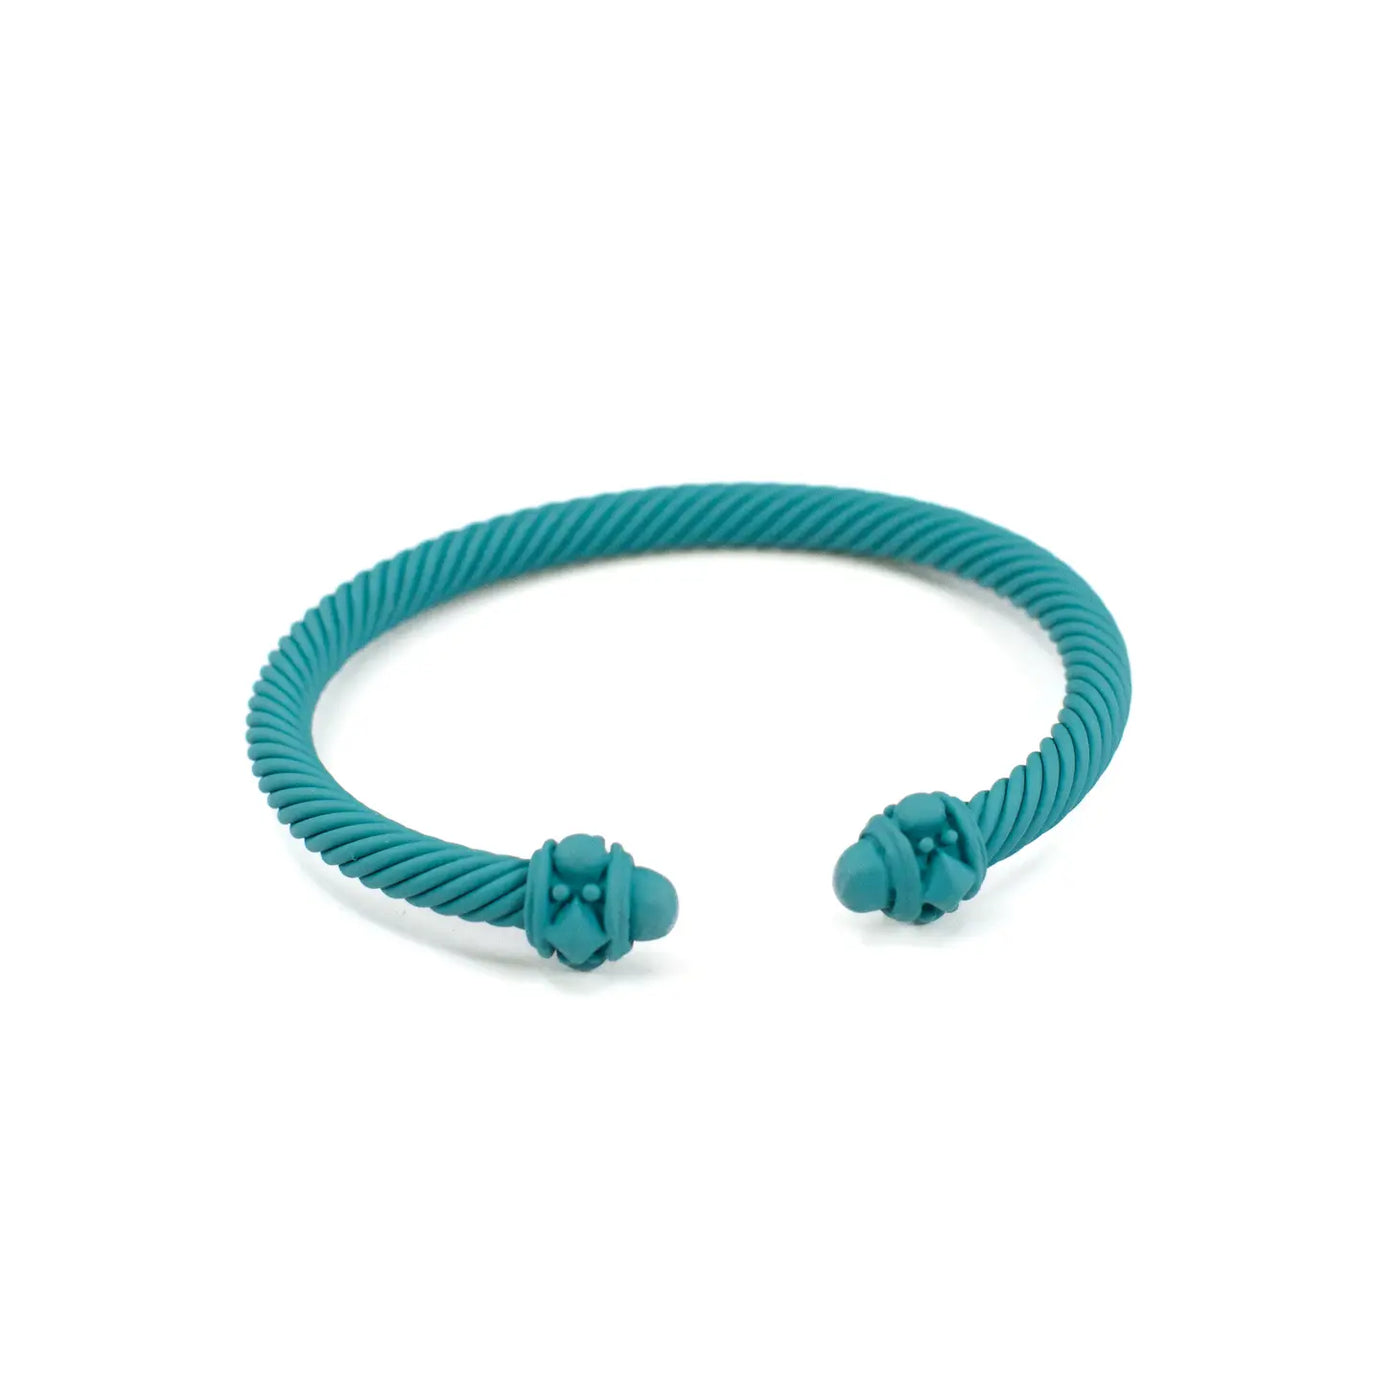 Cable Cuff Bracelet (Teal)